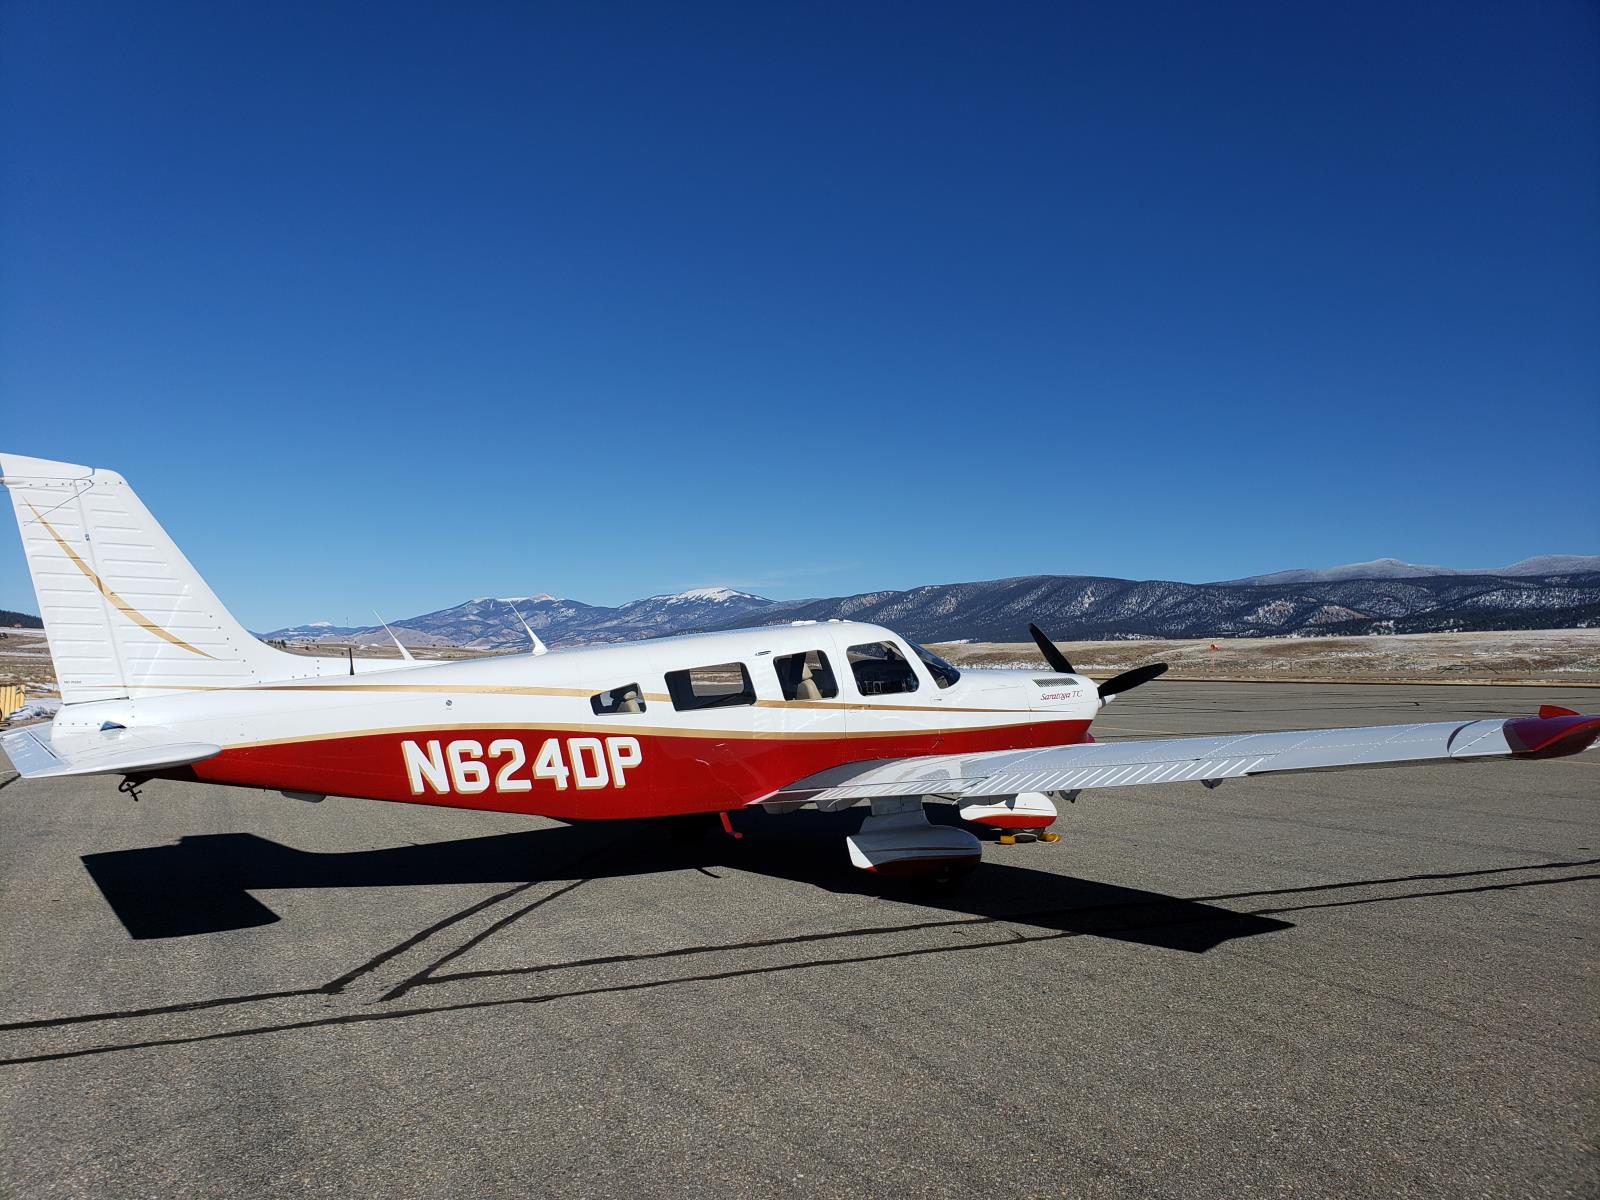 Saratoga N624DP on the ramp at KAXX - Angel Fire, NM